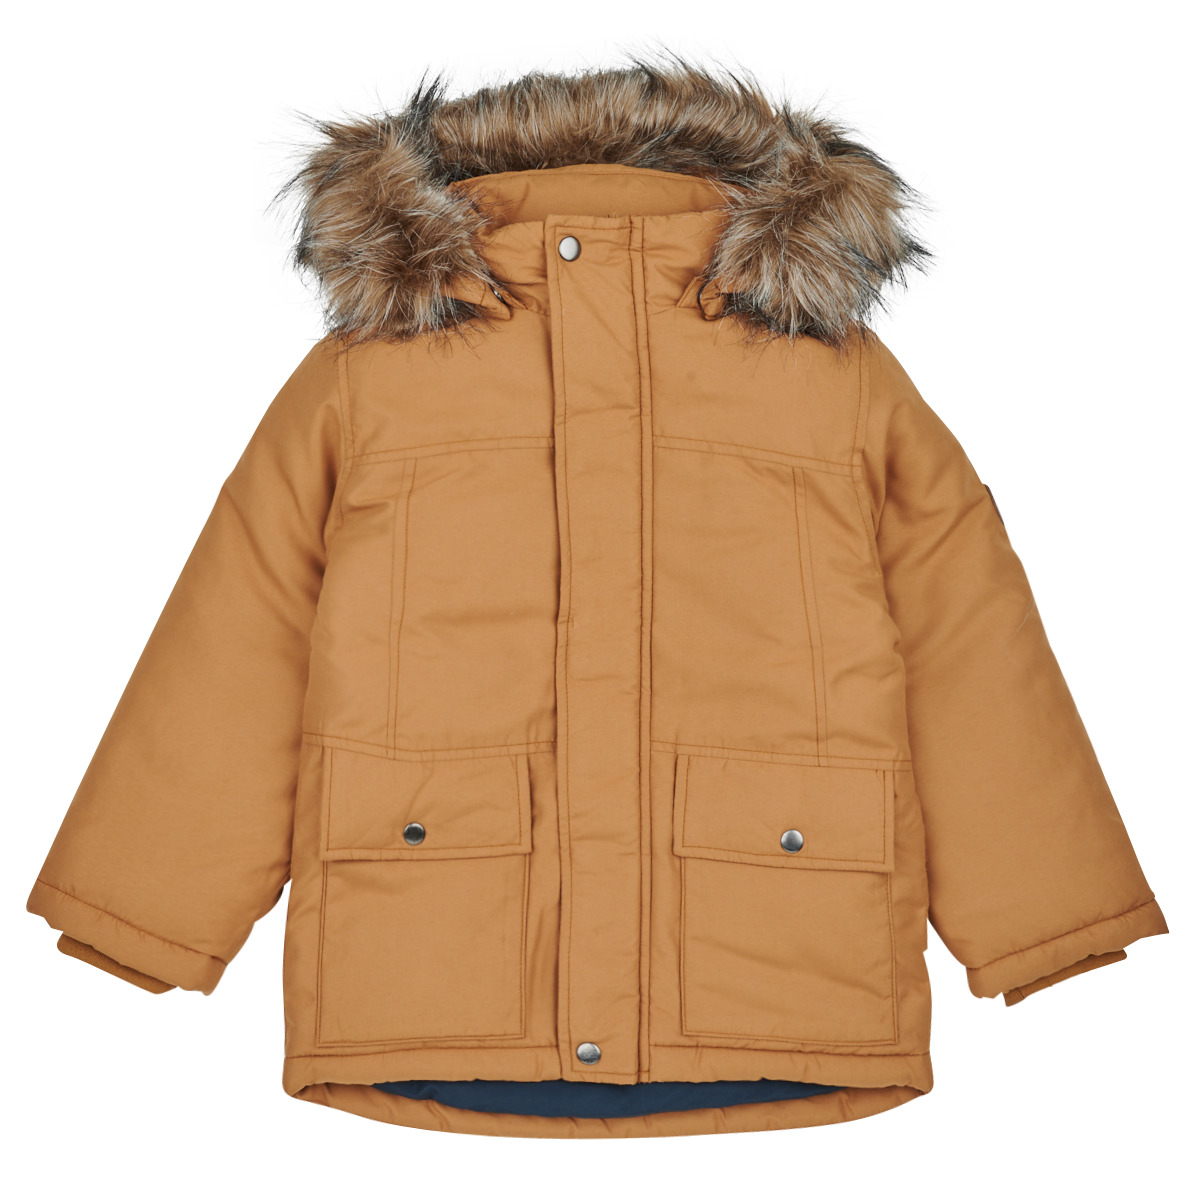 - PARKA SOUTH NET Child Parkas Clothing Spartoo NKMMARLIN - PB it Free Camel delivery | ! JACKET Name